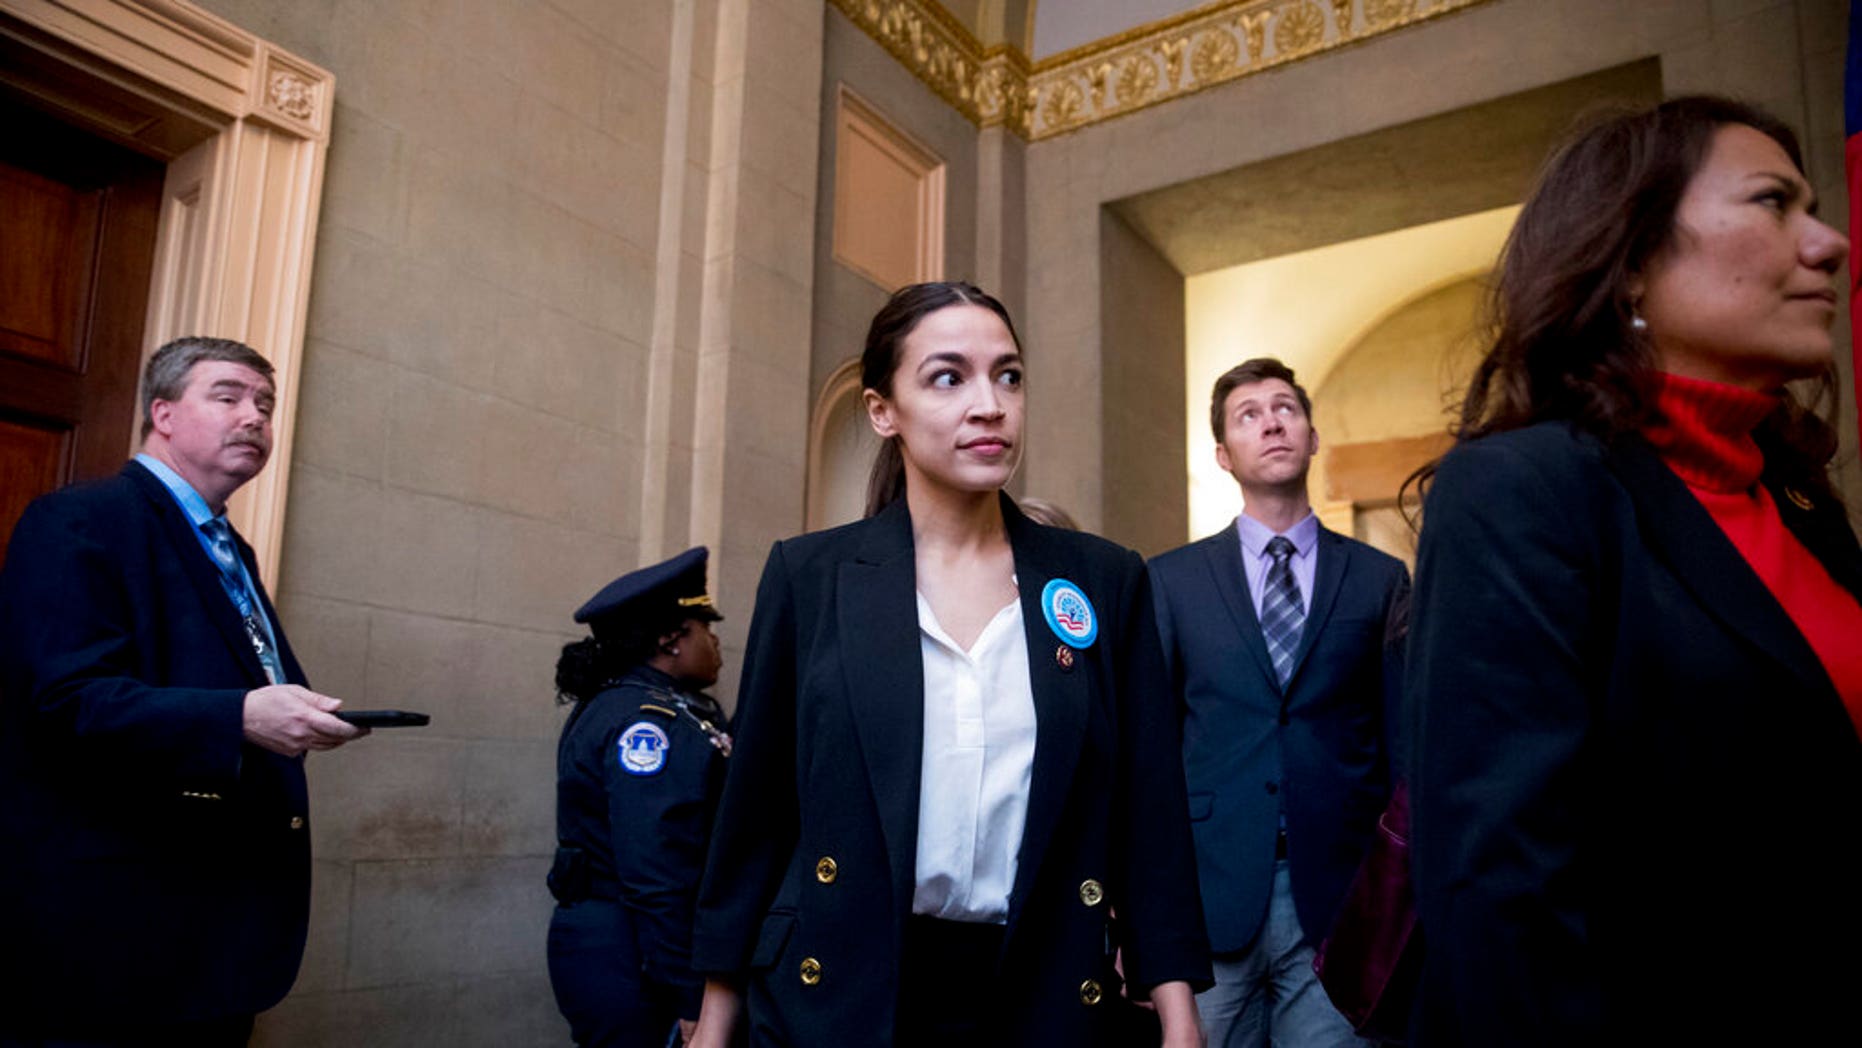 Ocasio-Cortez, other progressive Dems added to House Oversight Committee